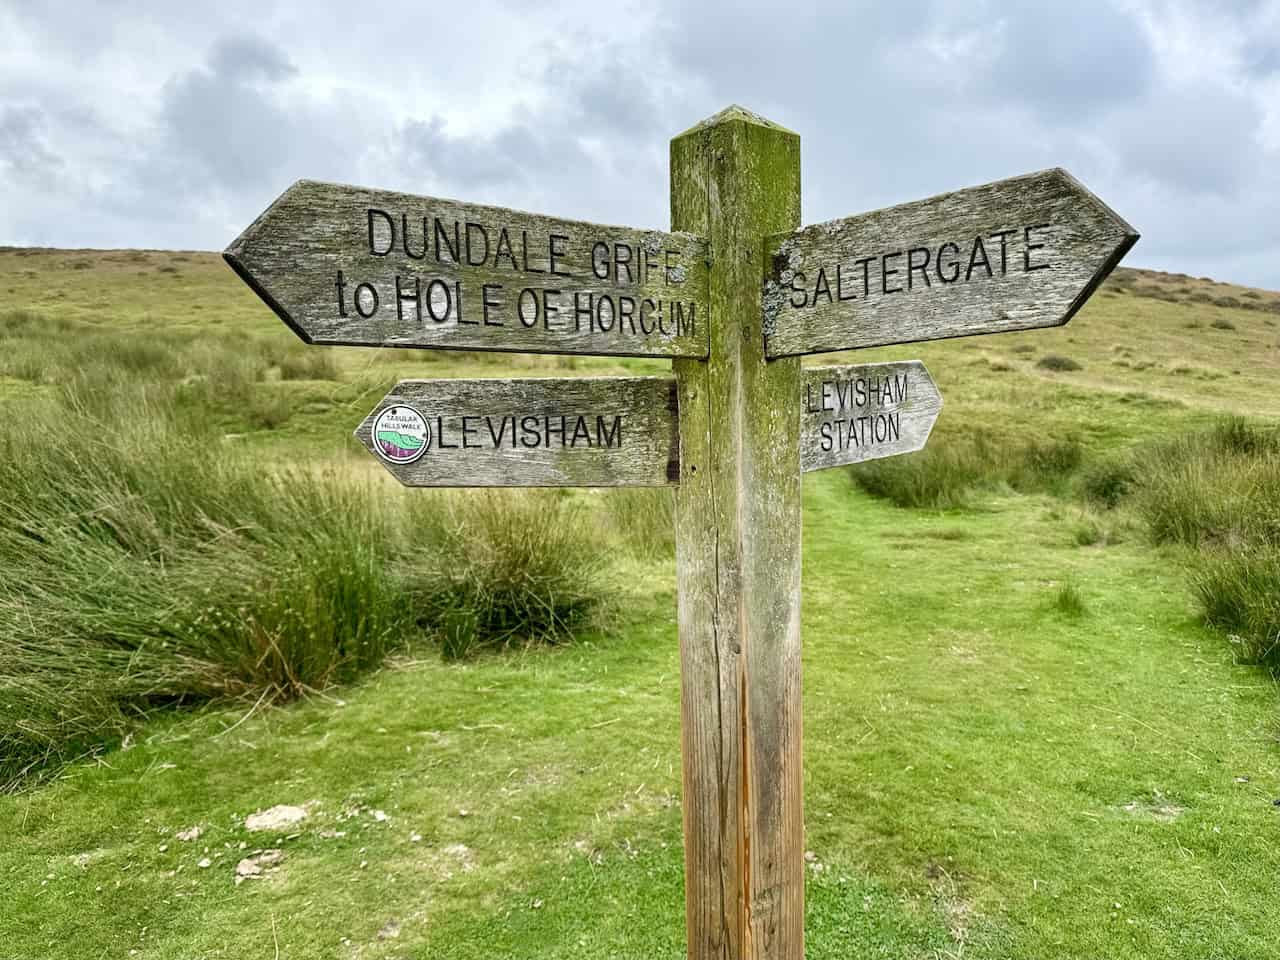 Crossroads at Dundale Rigg after about two and a half miles on the Tabular Hills Walk with five directional options.